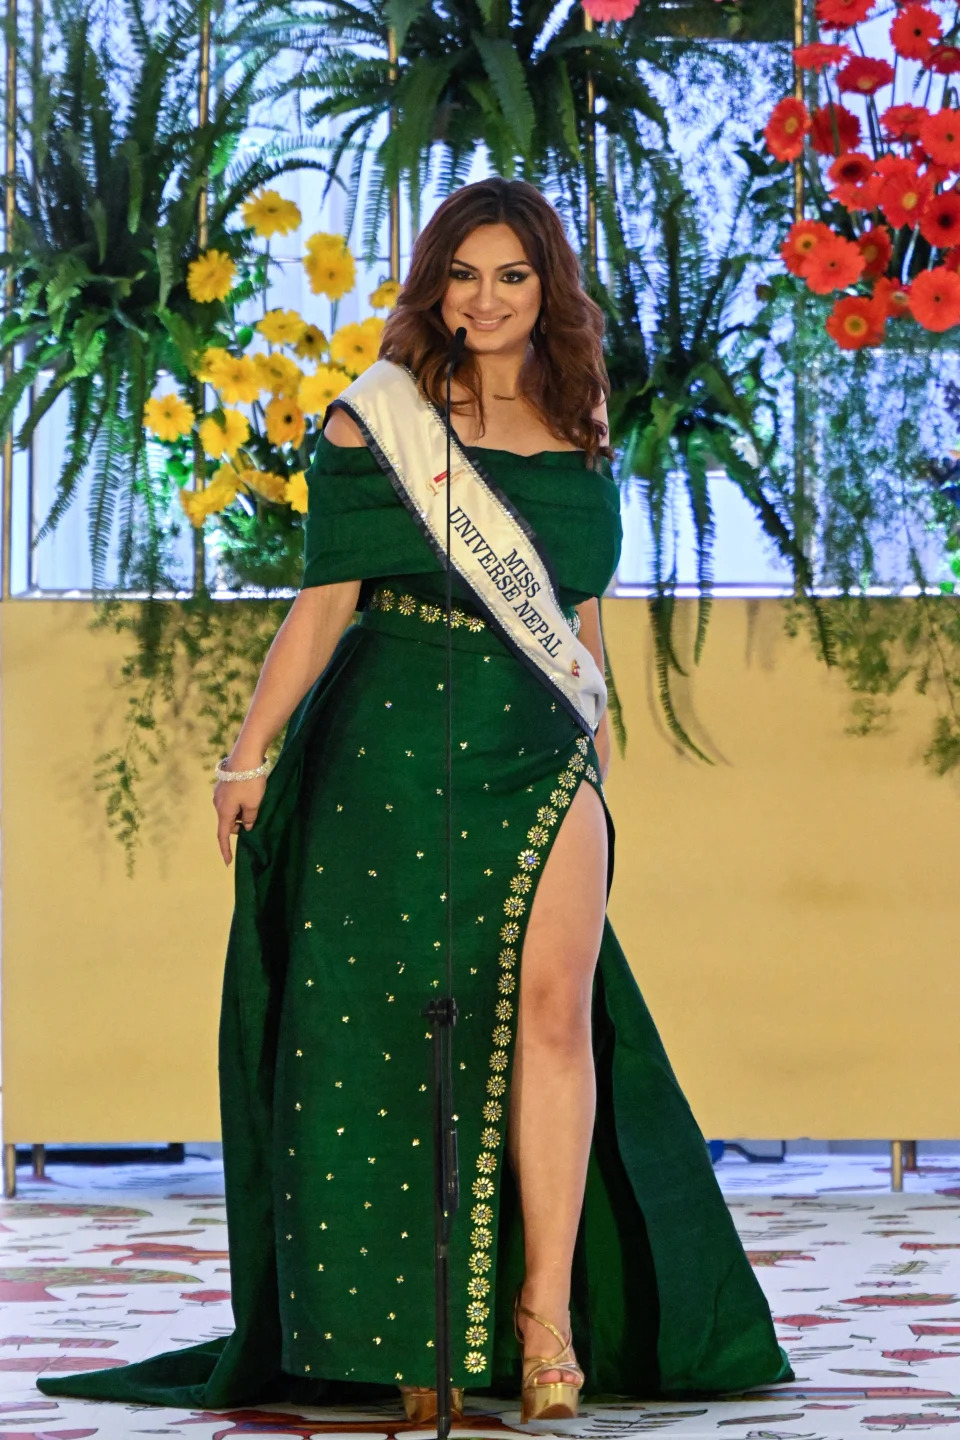 This photo taken on November 8, 2023 shows Jane Garrett, Miss Nepal 2023, posing for photos during a gala event at the headquarters of the Ministry of Foreign Affairs of El Salvador in San Salvador, host city of the 72th edition of the Miss Universe pageant, scheduled to take place on November 18, 2023. (Photo by Marvin RECINOS / AFP) (Photo by MARVIN RECINOS/AFP via Getty Images)